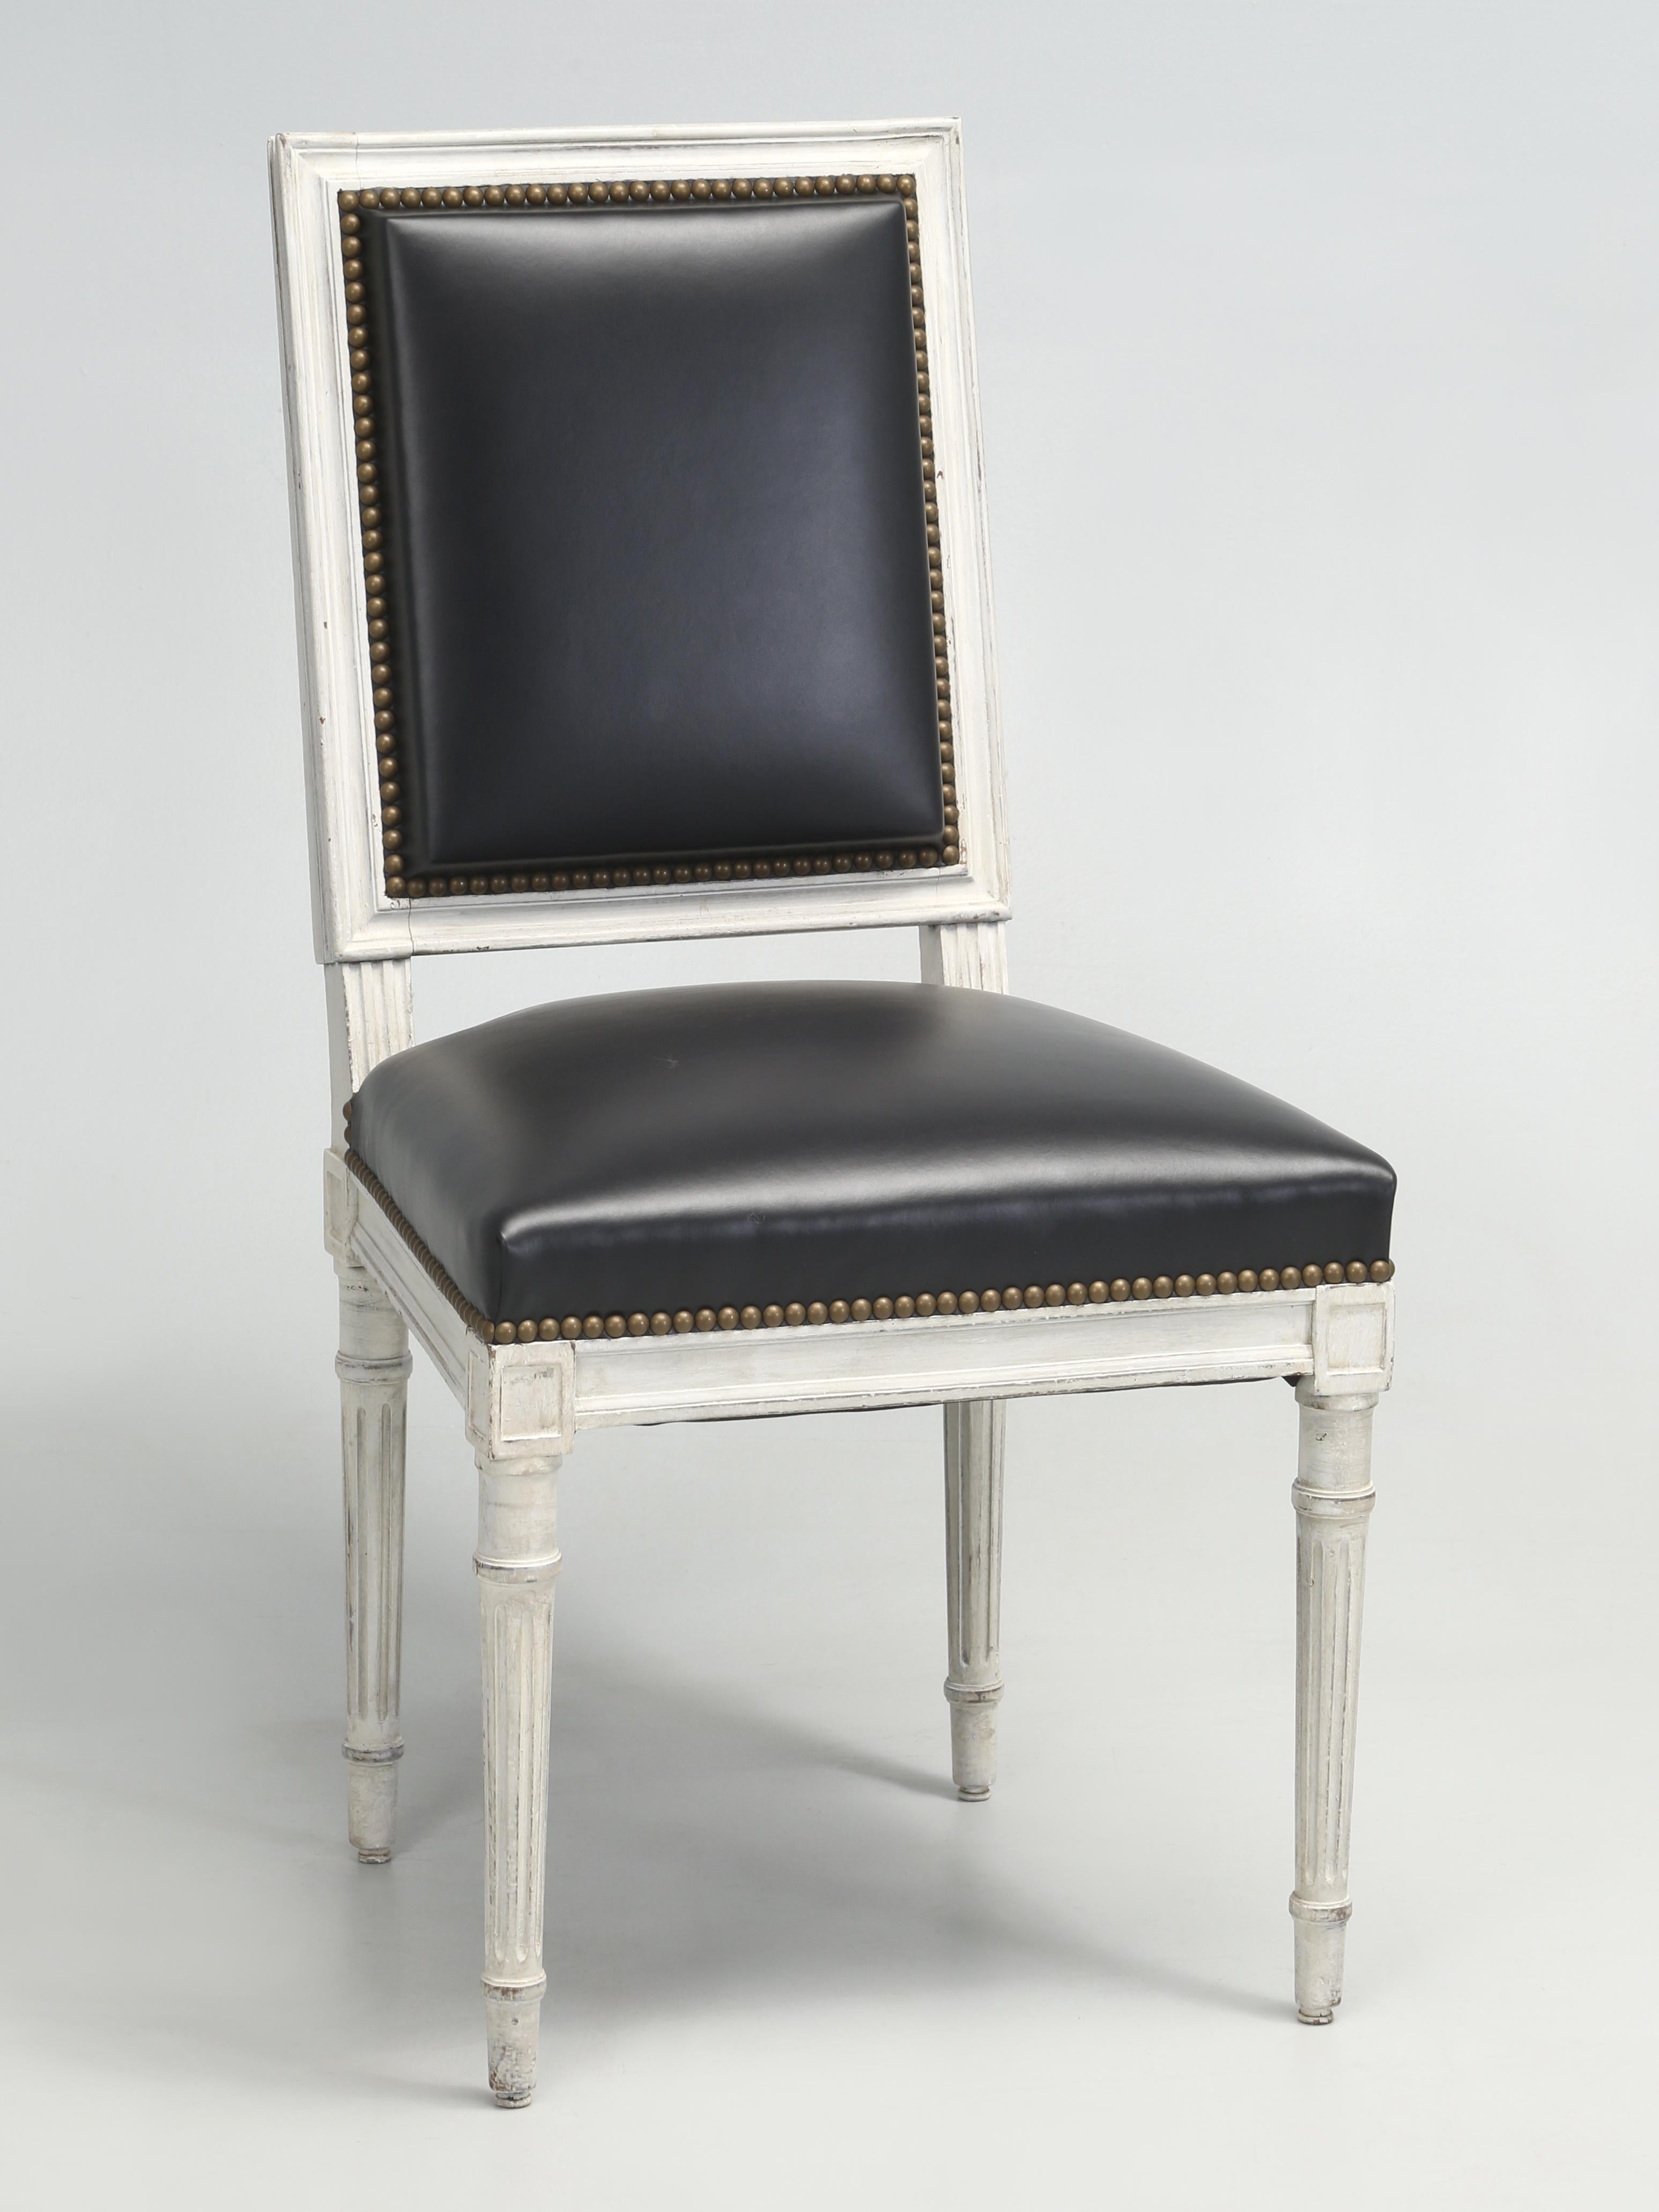 French Louis XVI Dining Chairs that our in house upholstery and restoration department restored from the bare wood frame on up. Everything was done old school, with horsehair and shredded coco fibers for padding, hand-tied coil springs, even our Old